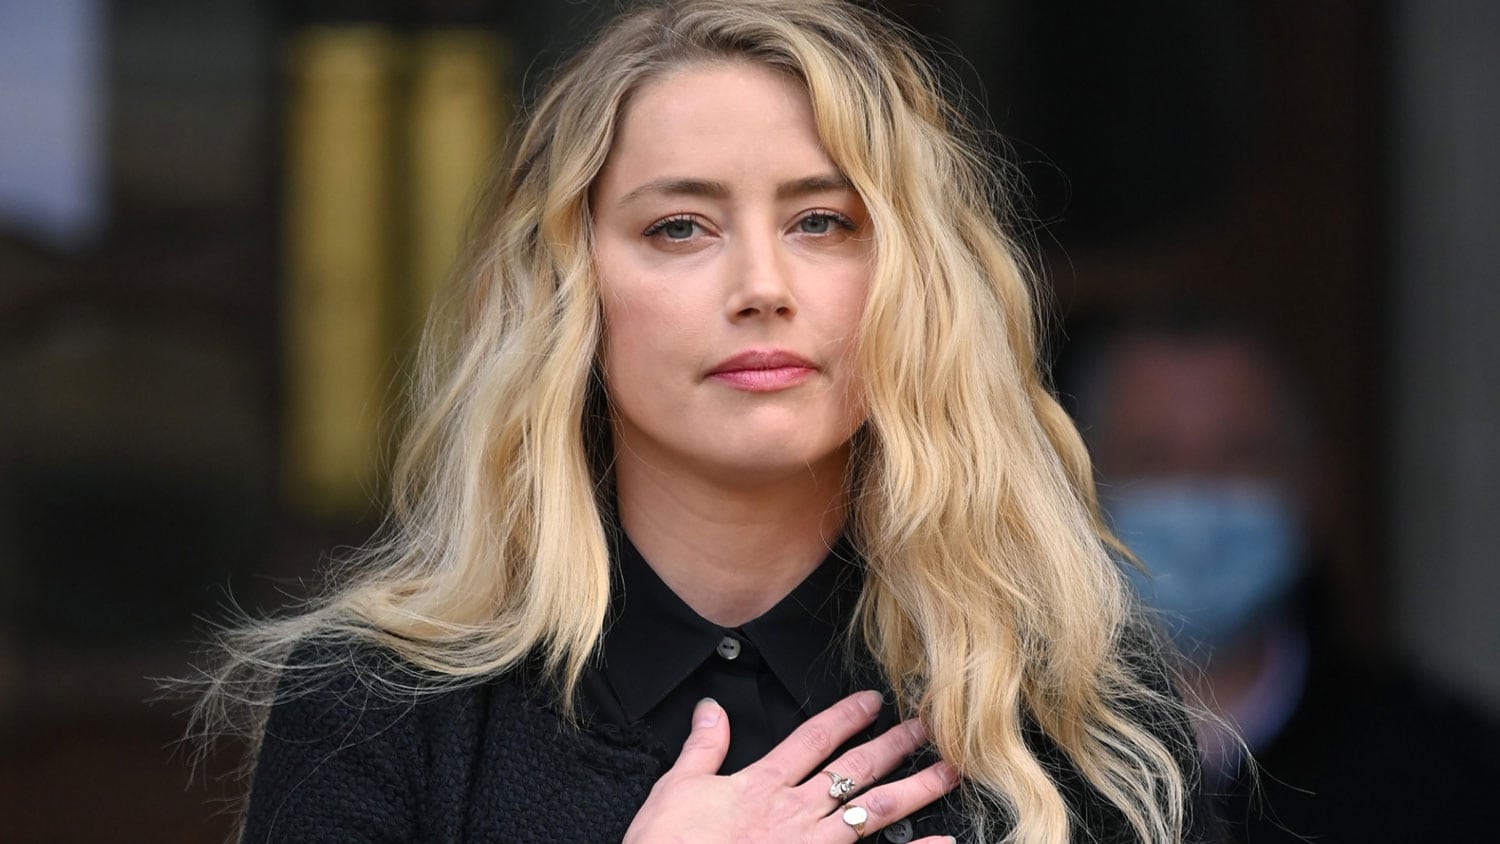 Amber Heard Porn Movie - Amber Heard Reportedly Offered $10M To Star In An Adult Movie